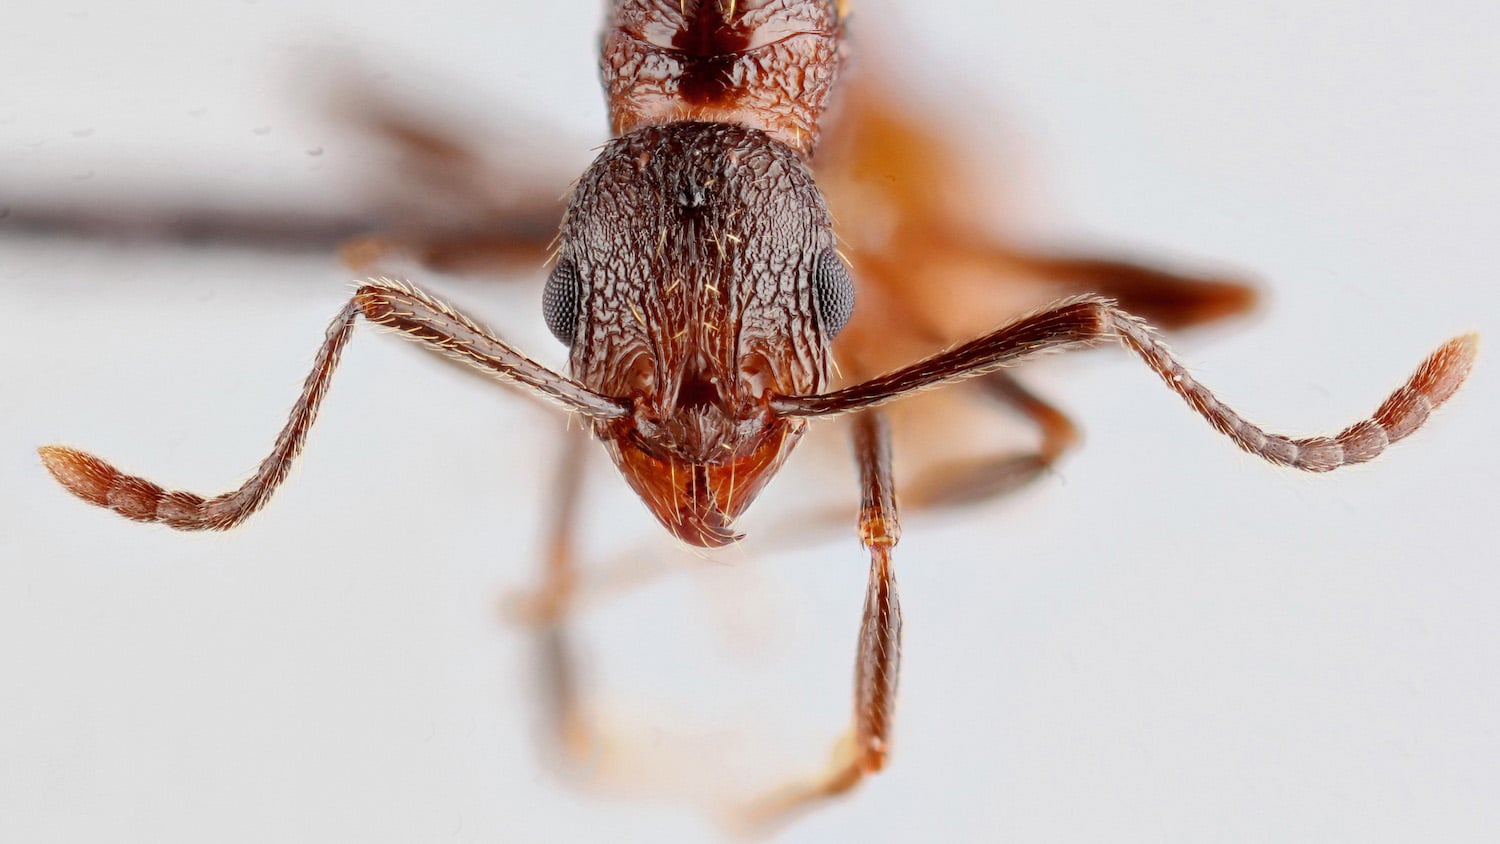 close-up photo of a reddish ant's face